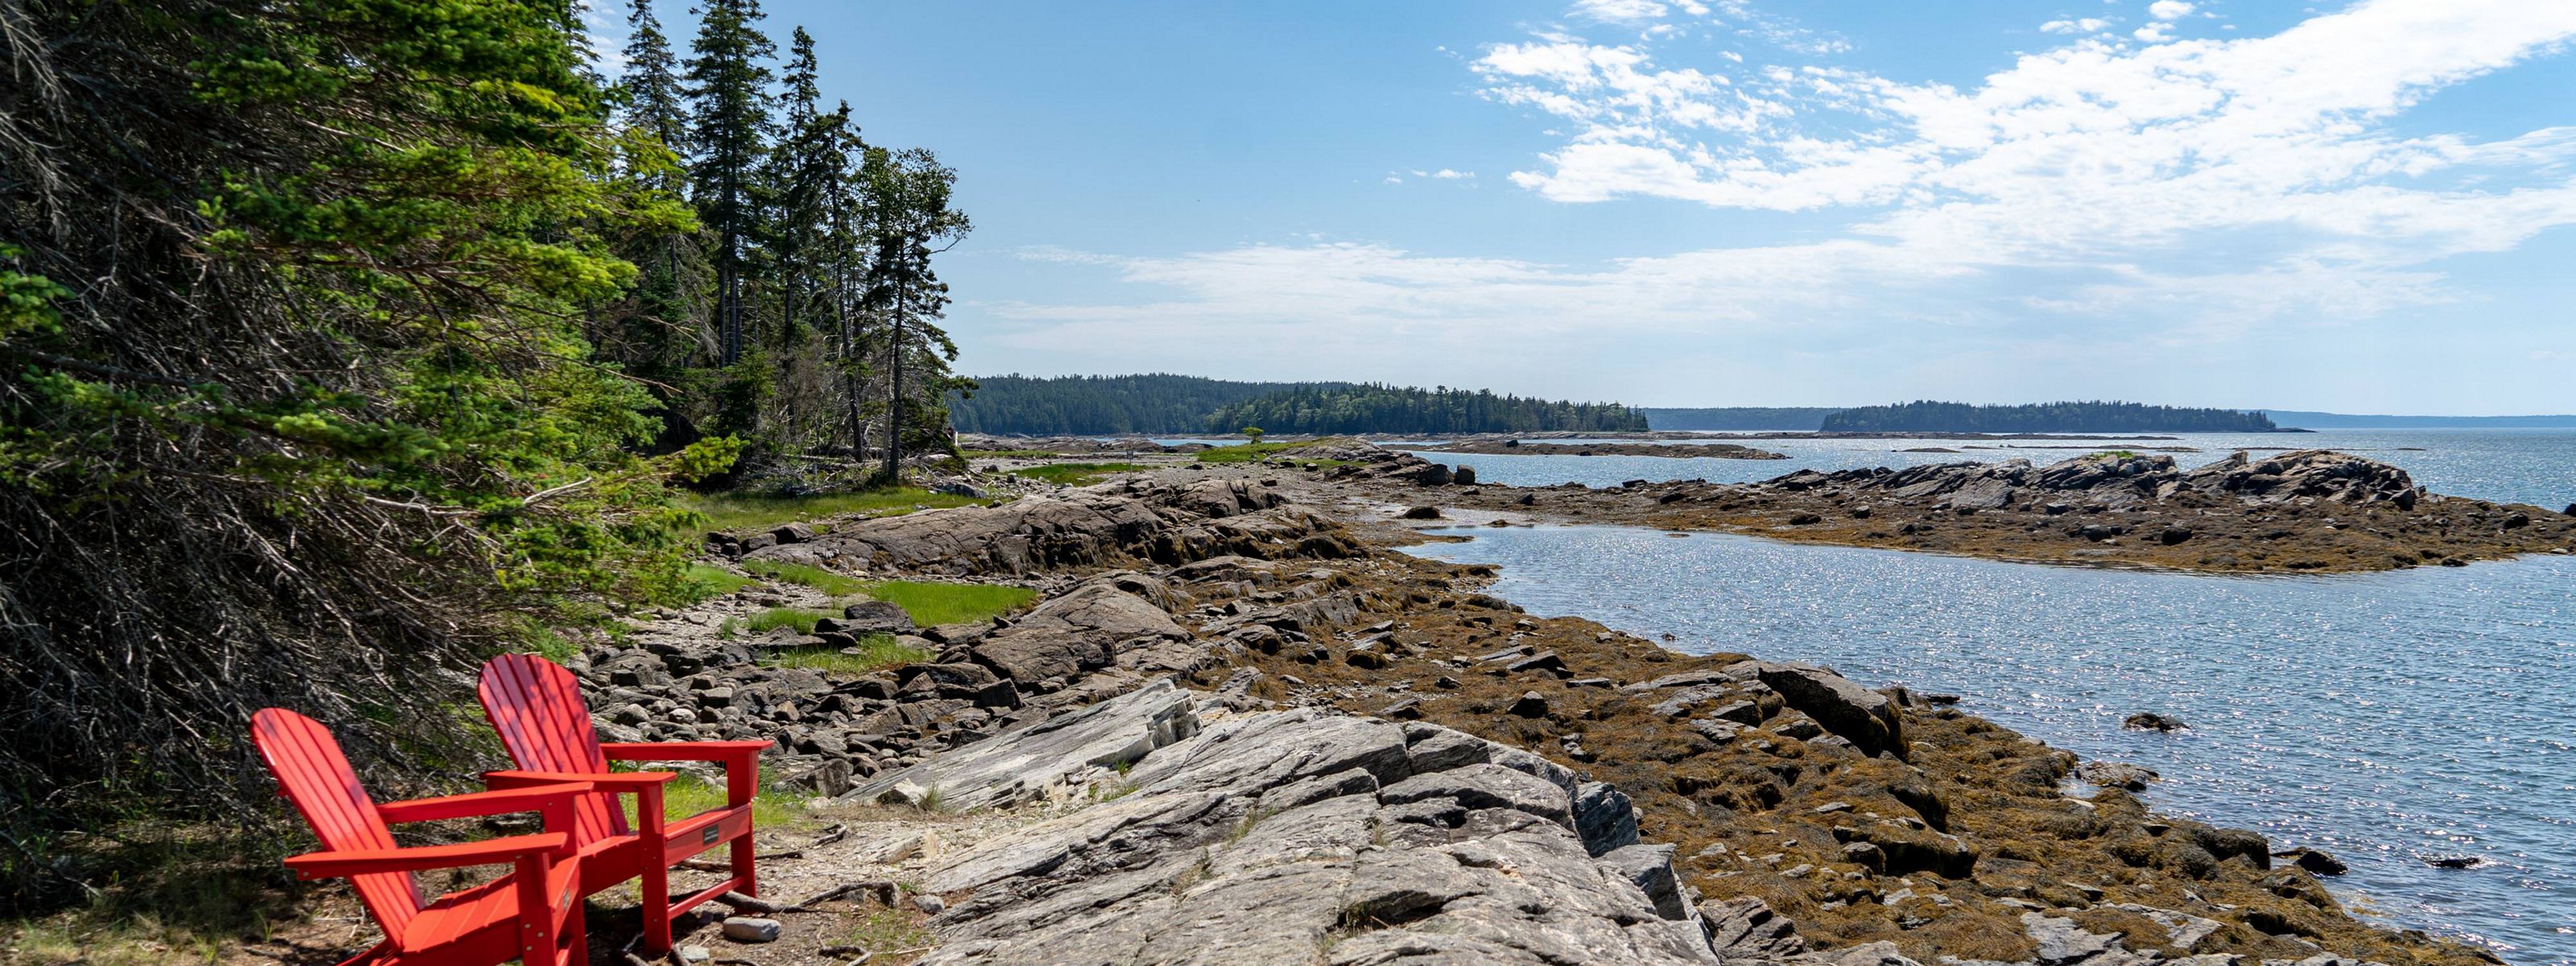 View along the rocky shoreline on the Maine coast.